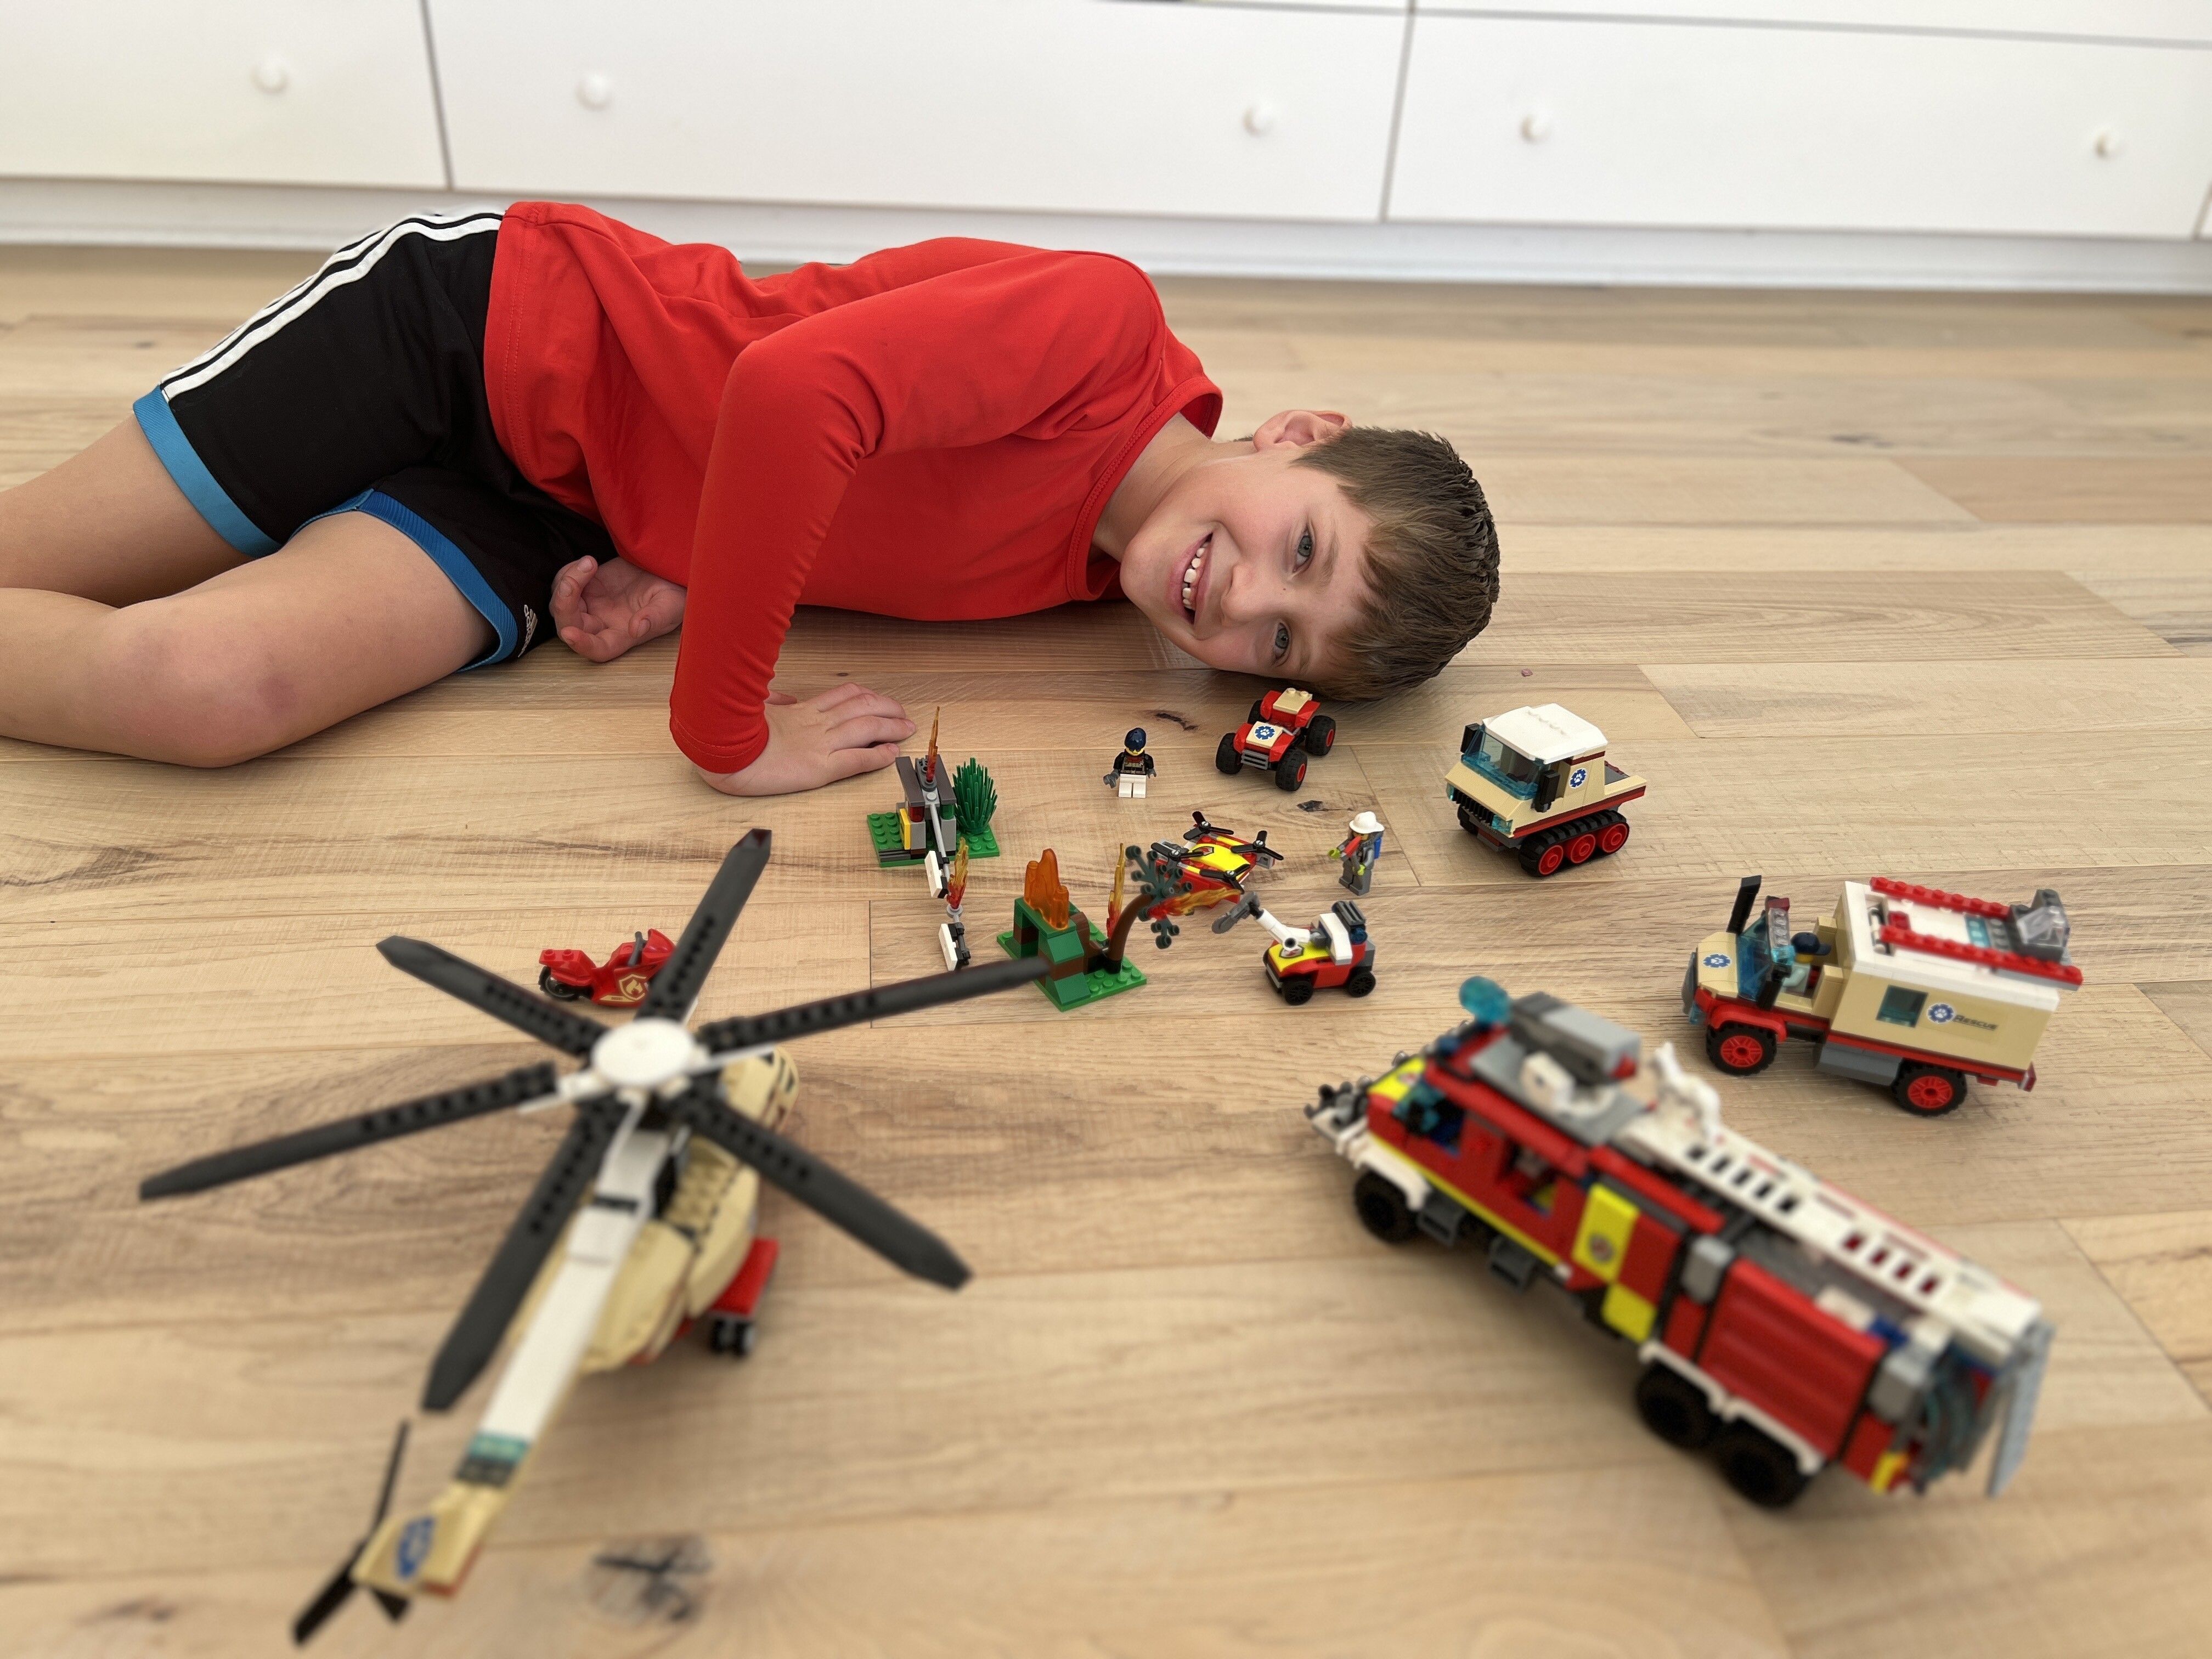 Orpheas is laying horizontally on the floor next to various fire and rescue toys, from helicopters to trucks.